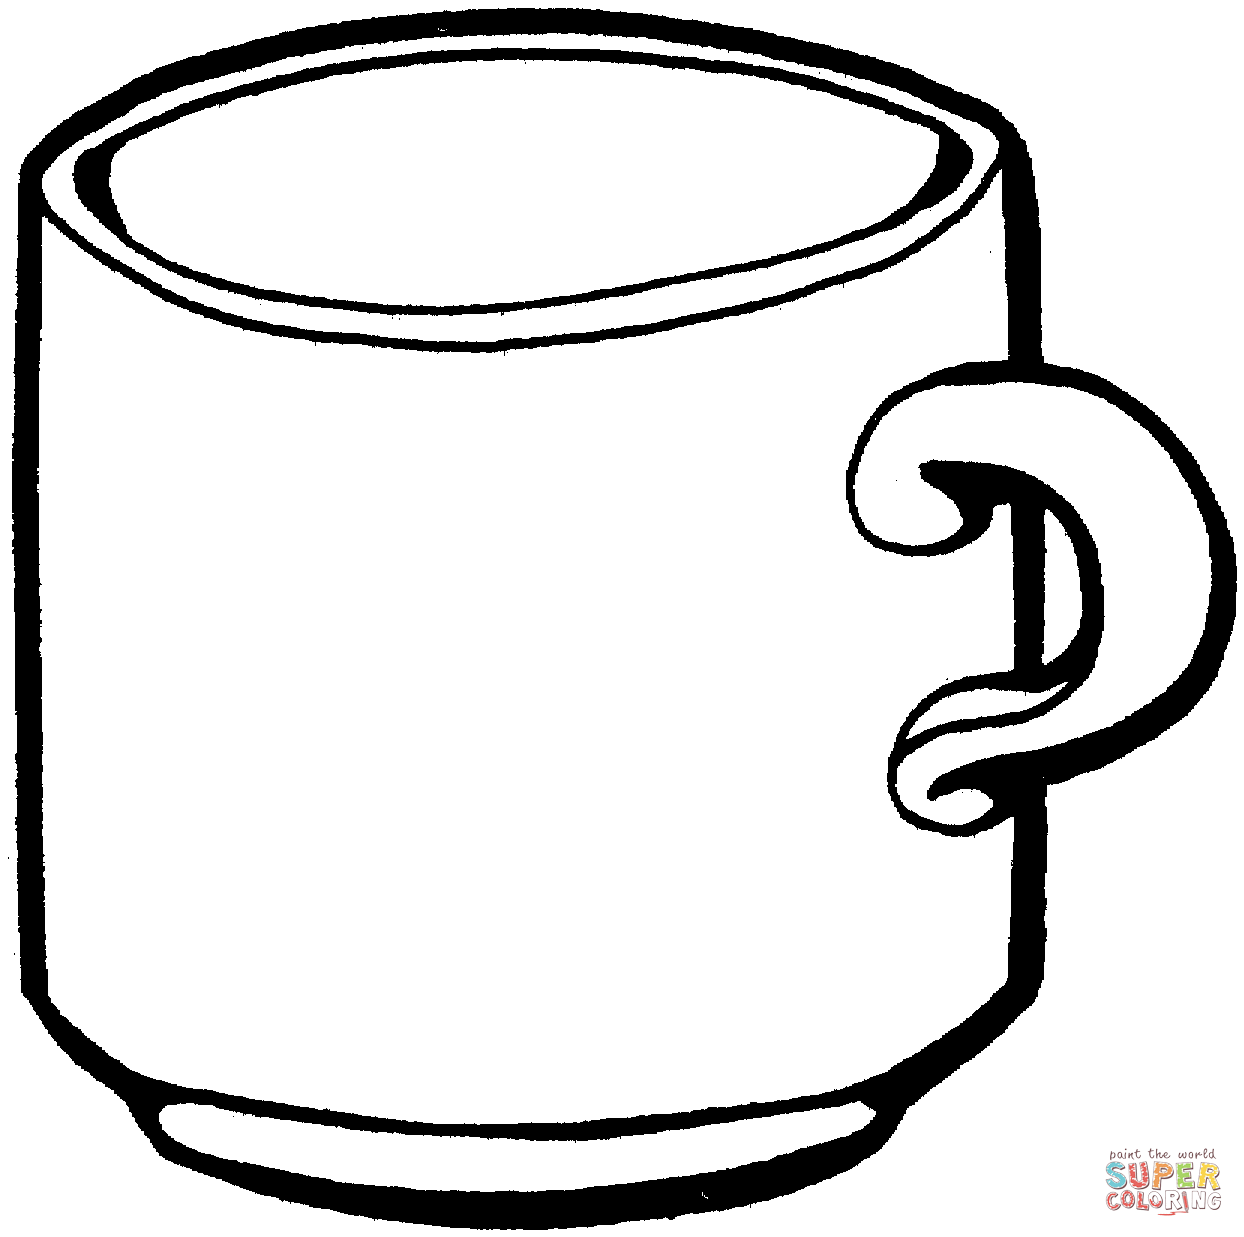 Tea Cup coloring page | Free Printable Coloring Pages